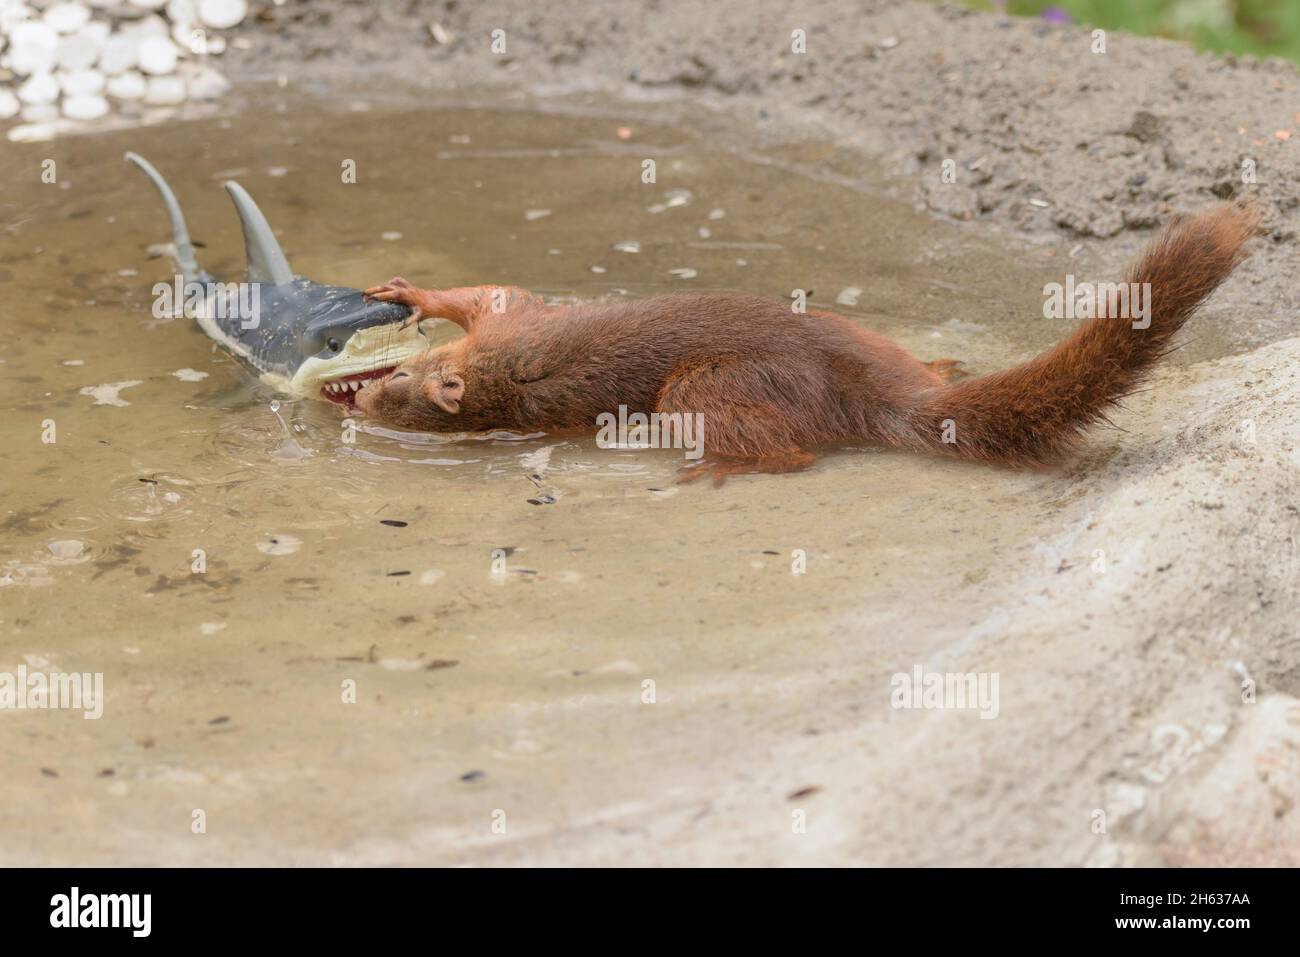 close up of red squirrel standing in water holding a shark Stock Photo